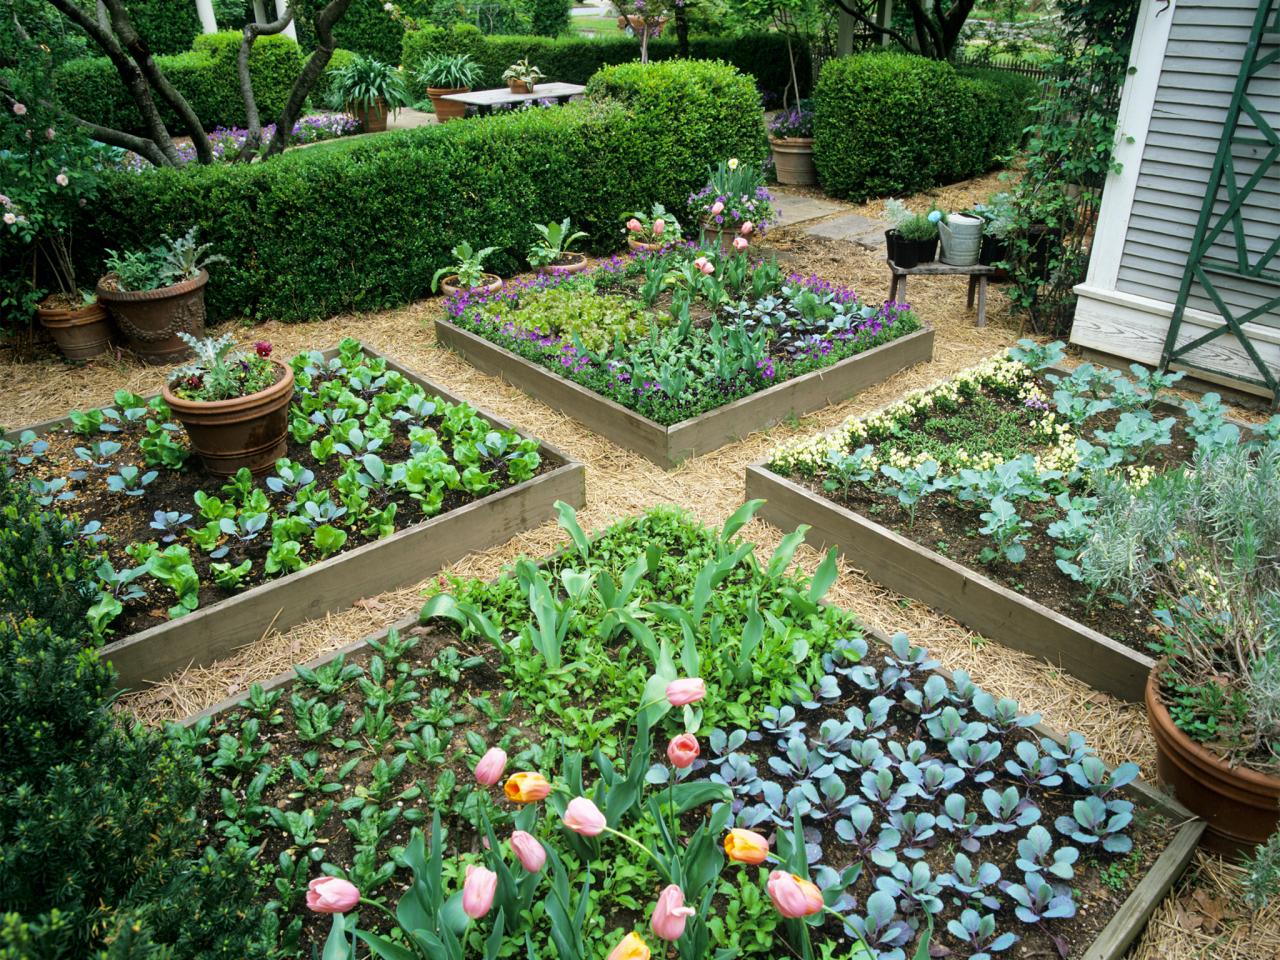 https://hgtvhome.sndimg.com/content/dam/images/grdn/fullset/2013/1/20/0/CI_intensive-gardening-allows-a-lot-of-produce-to-grow-in-a-small-space.jpg.rend.hgtvcom.1280.960.suffix/1452644679836.jpeg